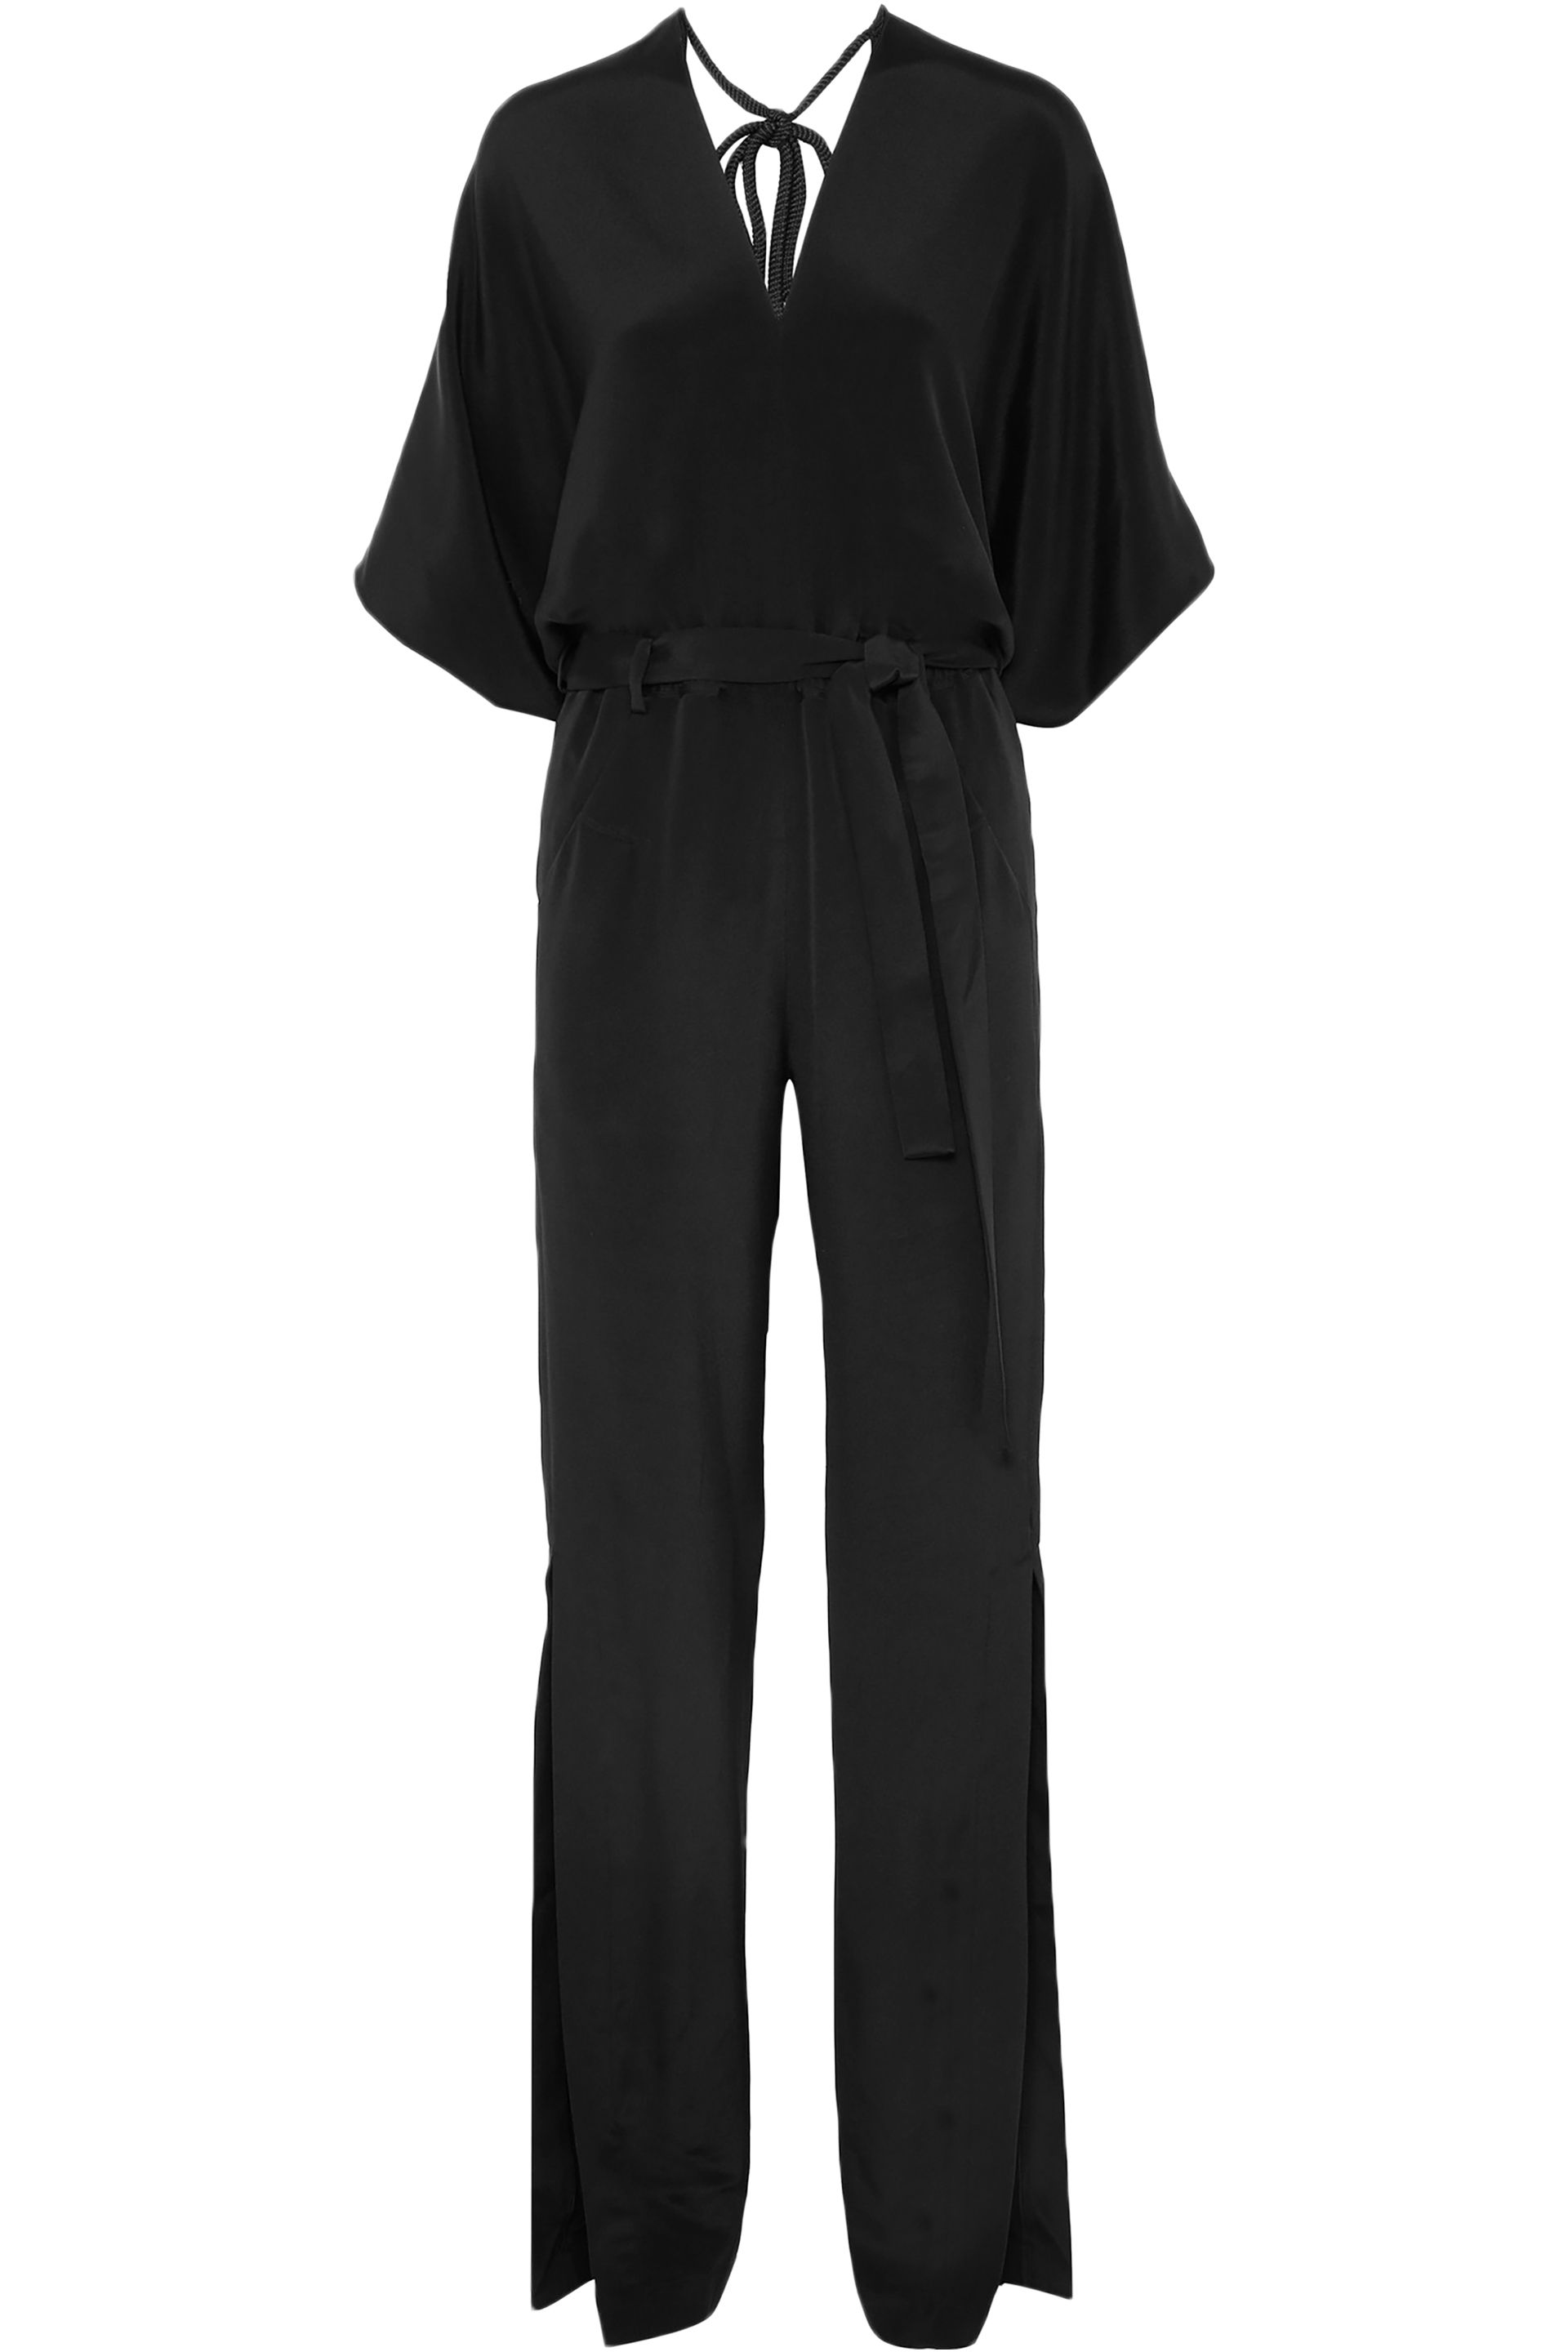 Just In | New Fashion Arrivals At THE OUTNET